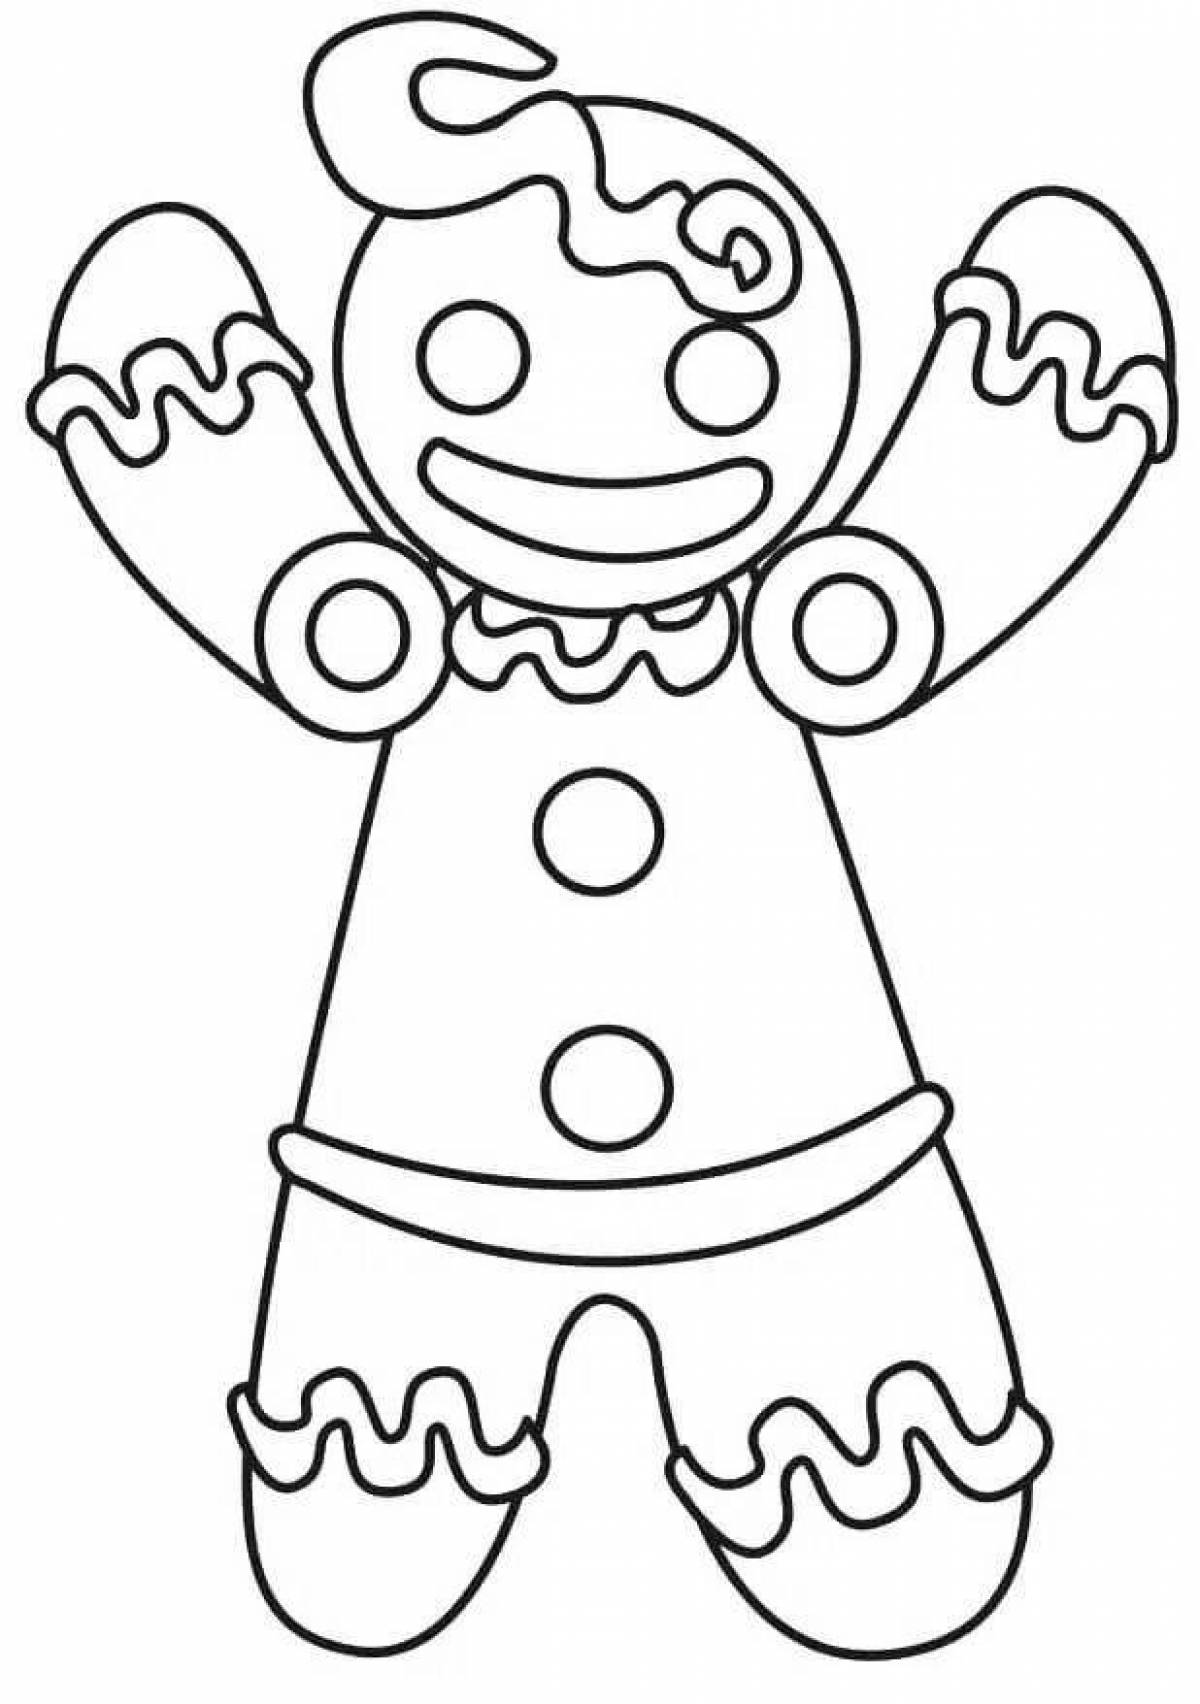 Coloring fairytale gingerbread man